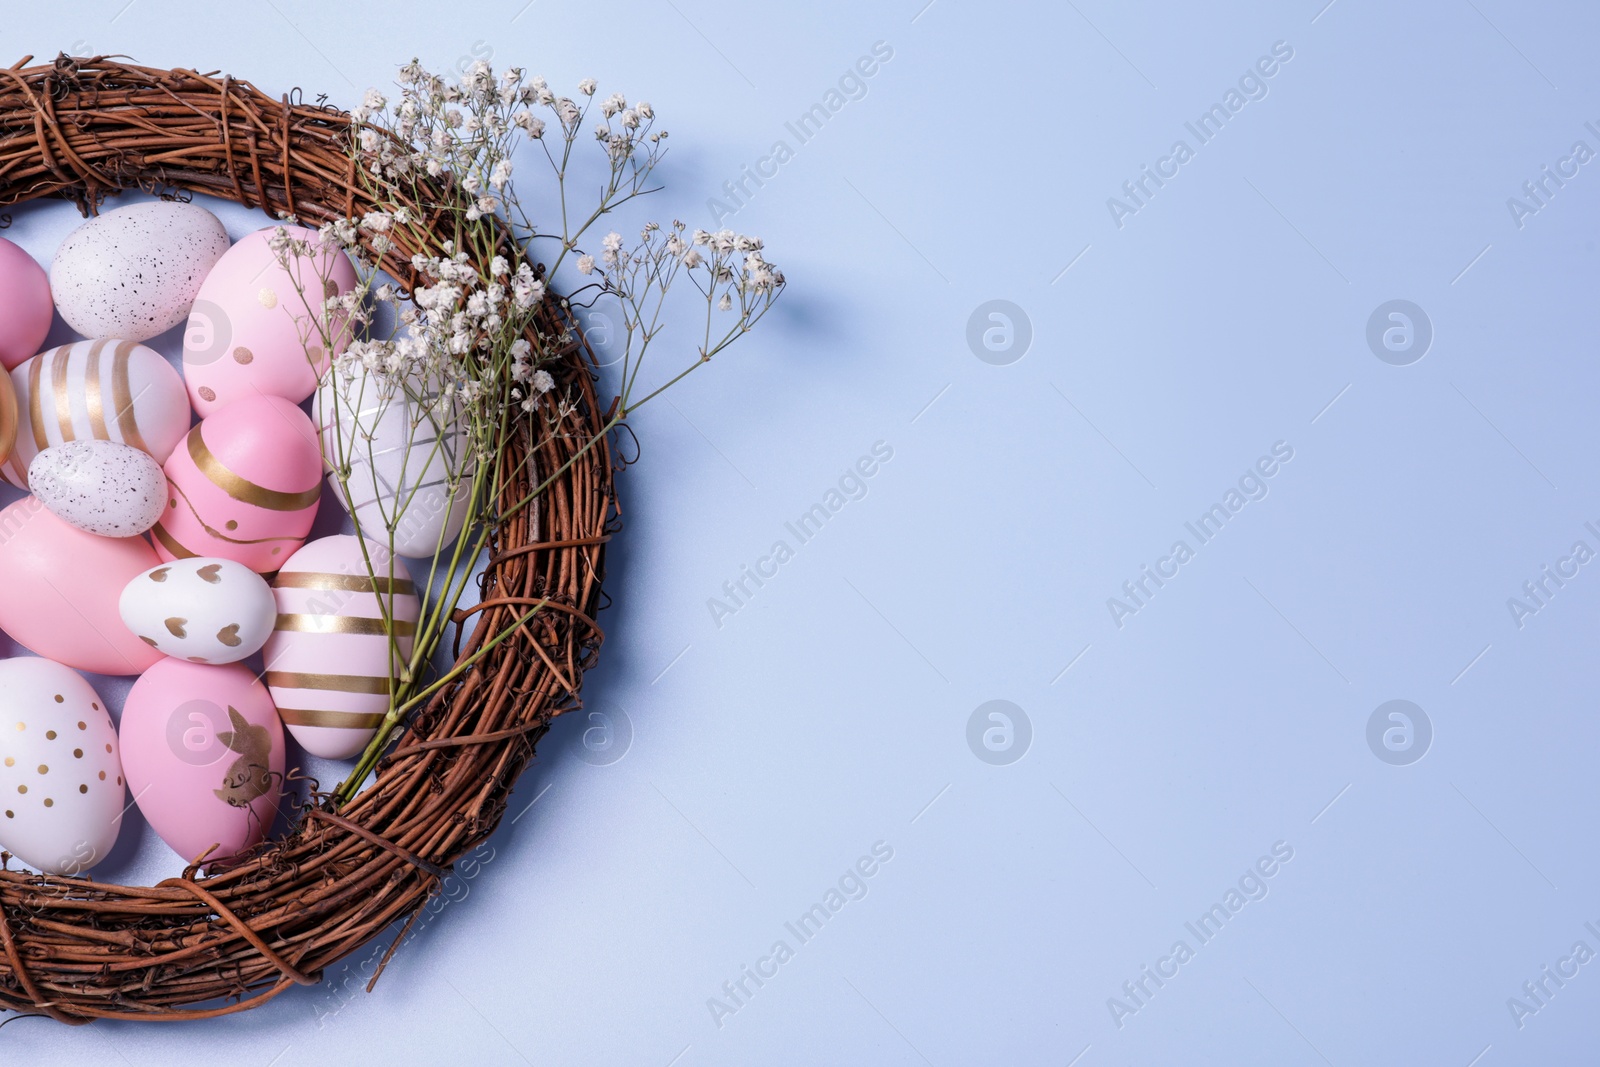 Photo of Festively decorated Easter eggs, vine wreath and gypsophila flowers on light blue background, top view. Space for text